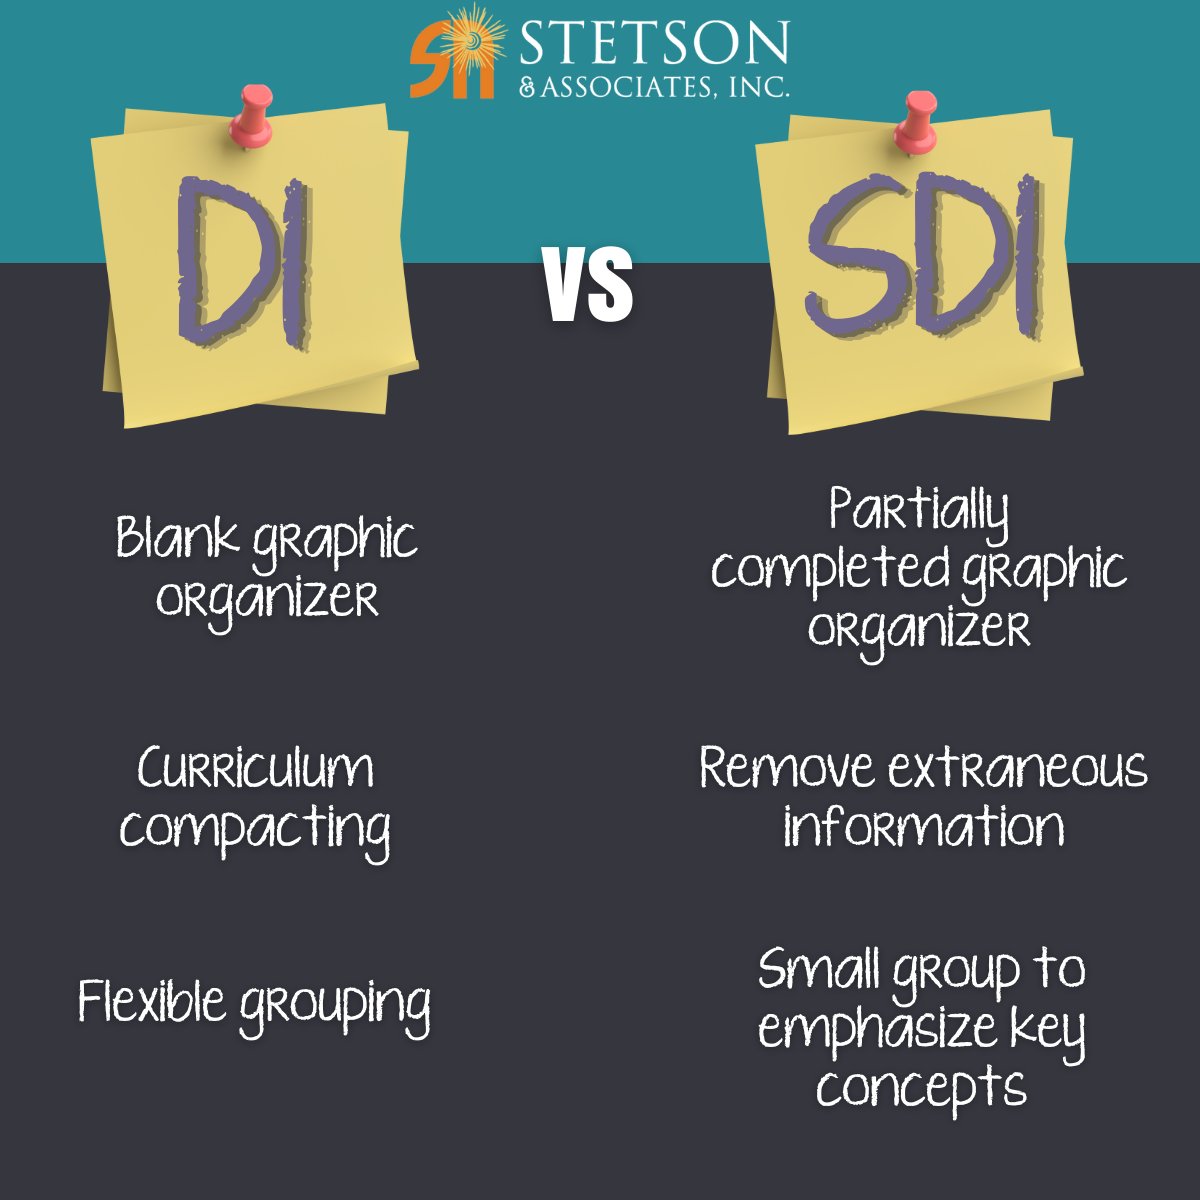 Yesterday's webinar clarified how to plan for Specially Designed Instruction in addition to differentiation (DI). The impact of effective SDI on sts achievement is significant. Do the T's at your campus understand the difference between DI and SDI? #edchat #inclusiveschools